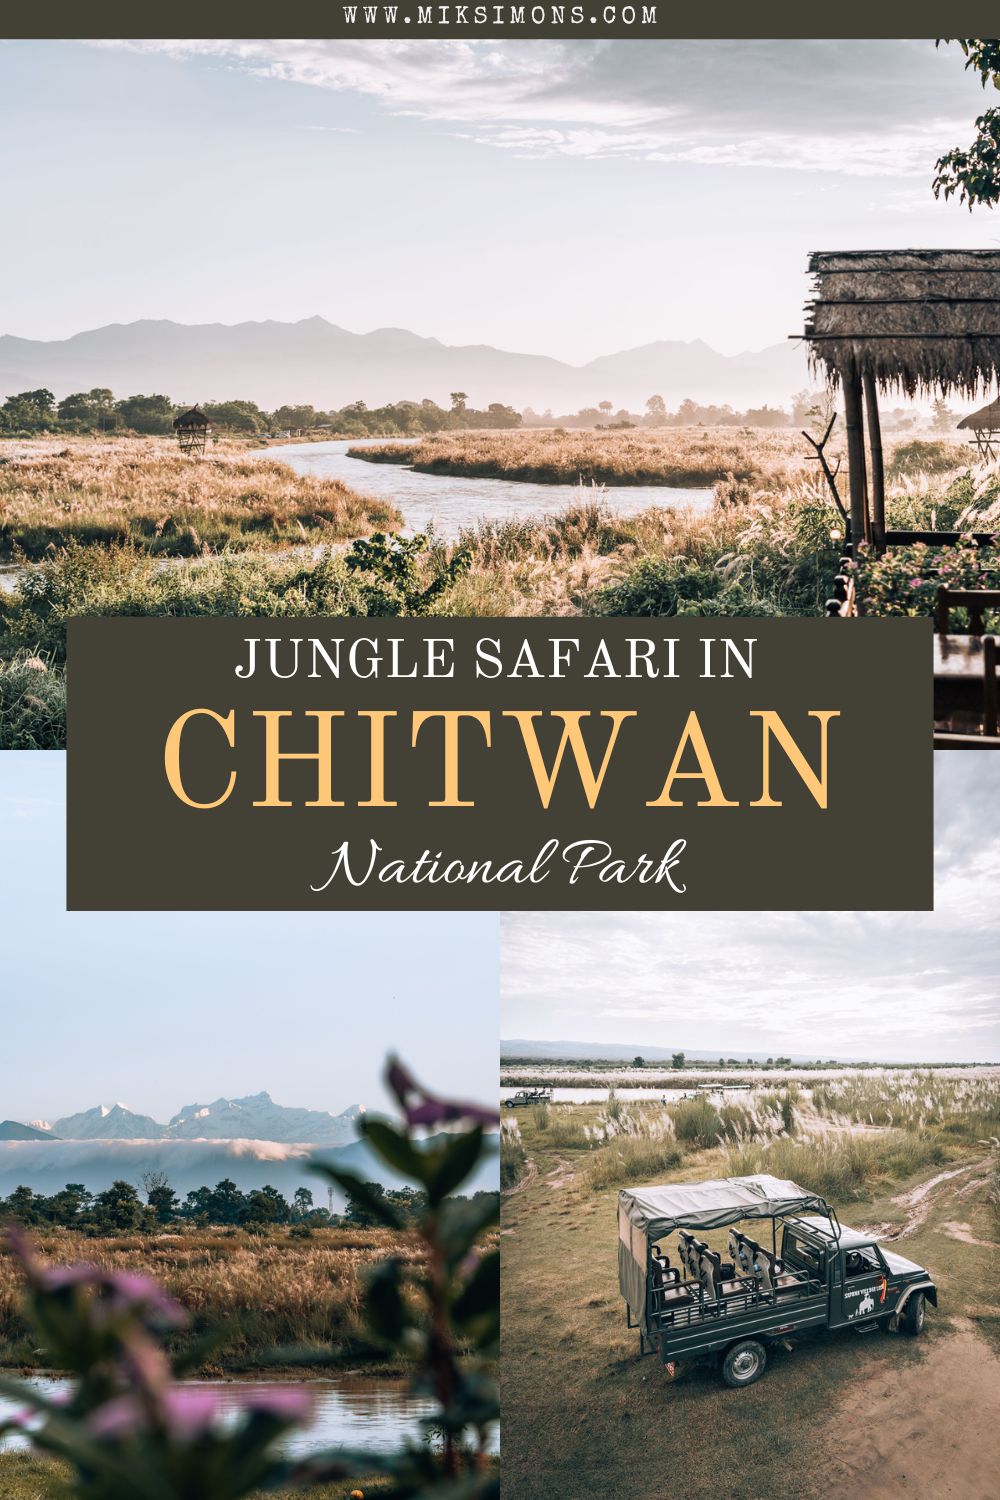 A jungle safari in Chitwan National Park - 6 awesome reasons to add this to your bucket list